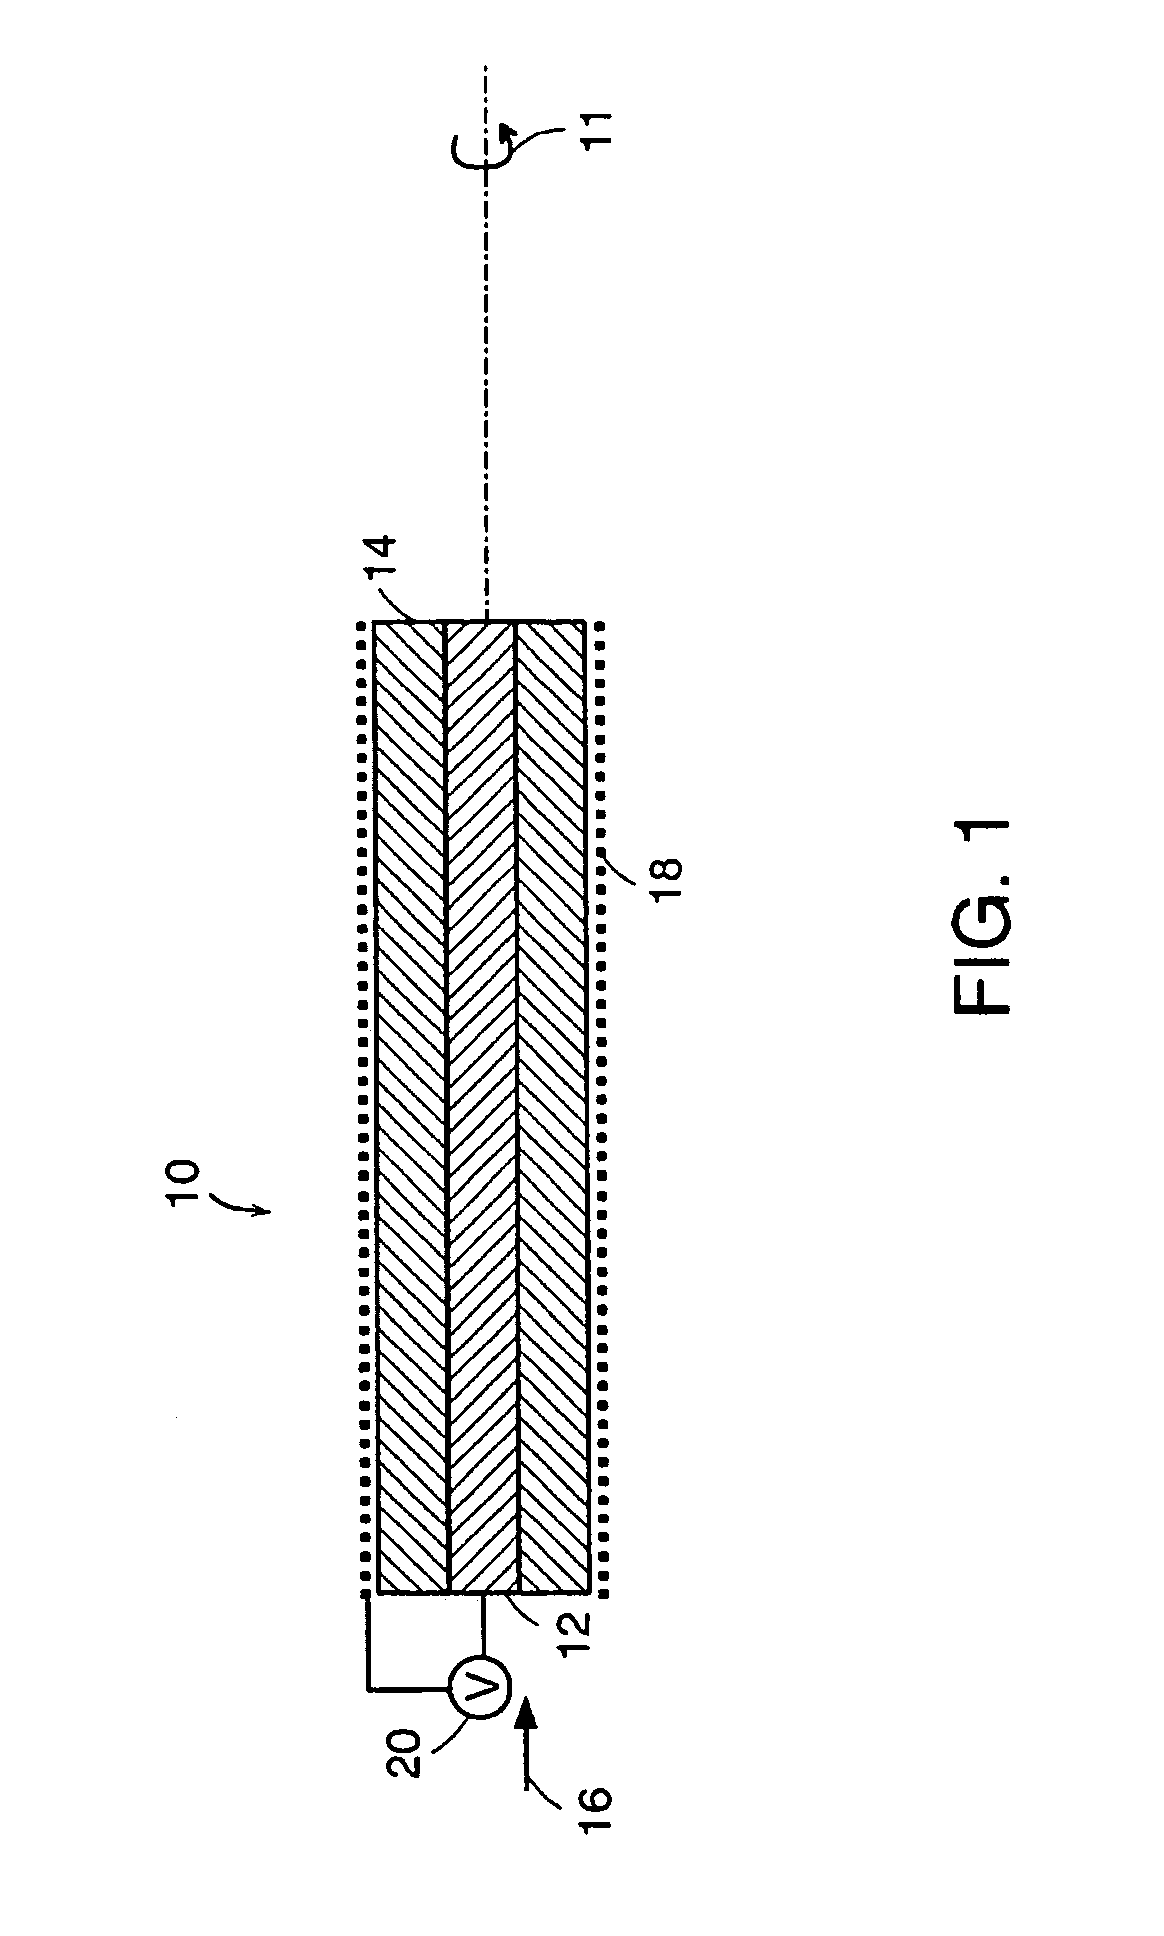 Electronically activated capture device